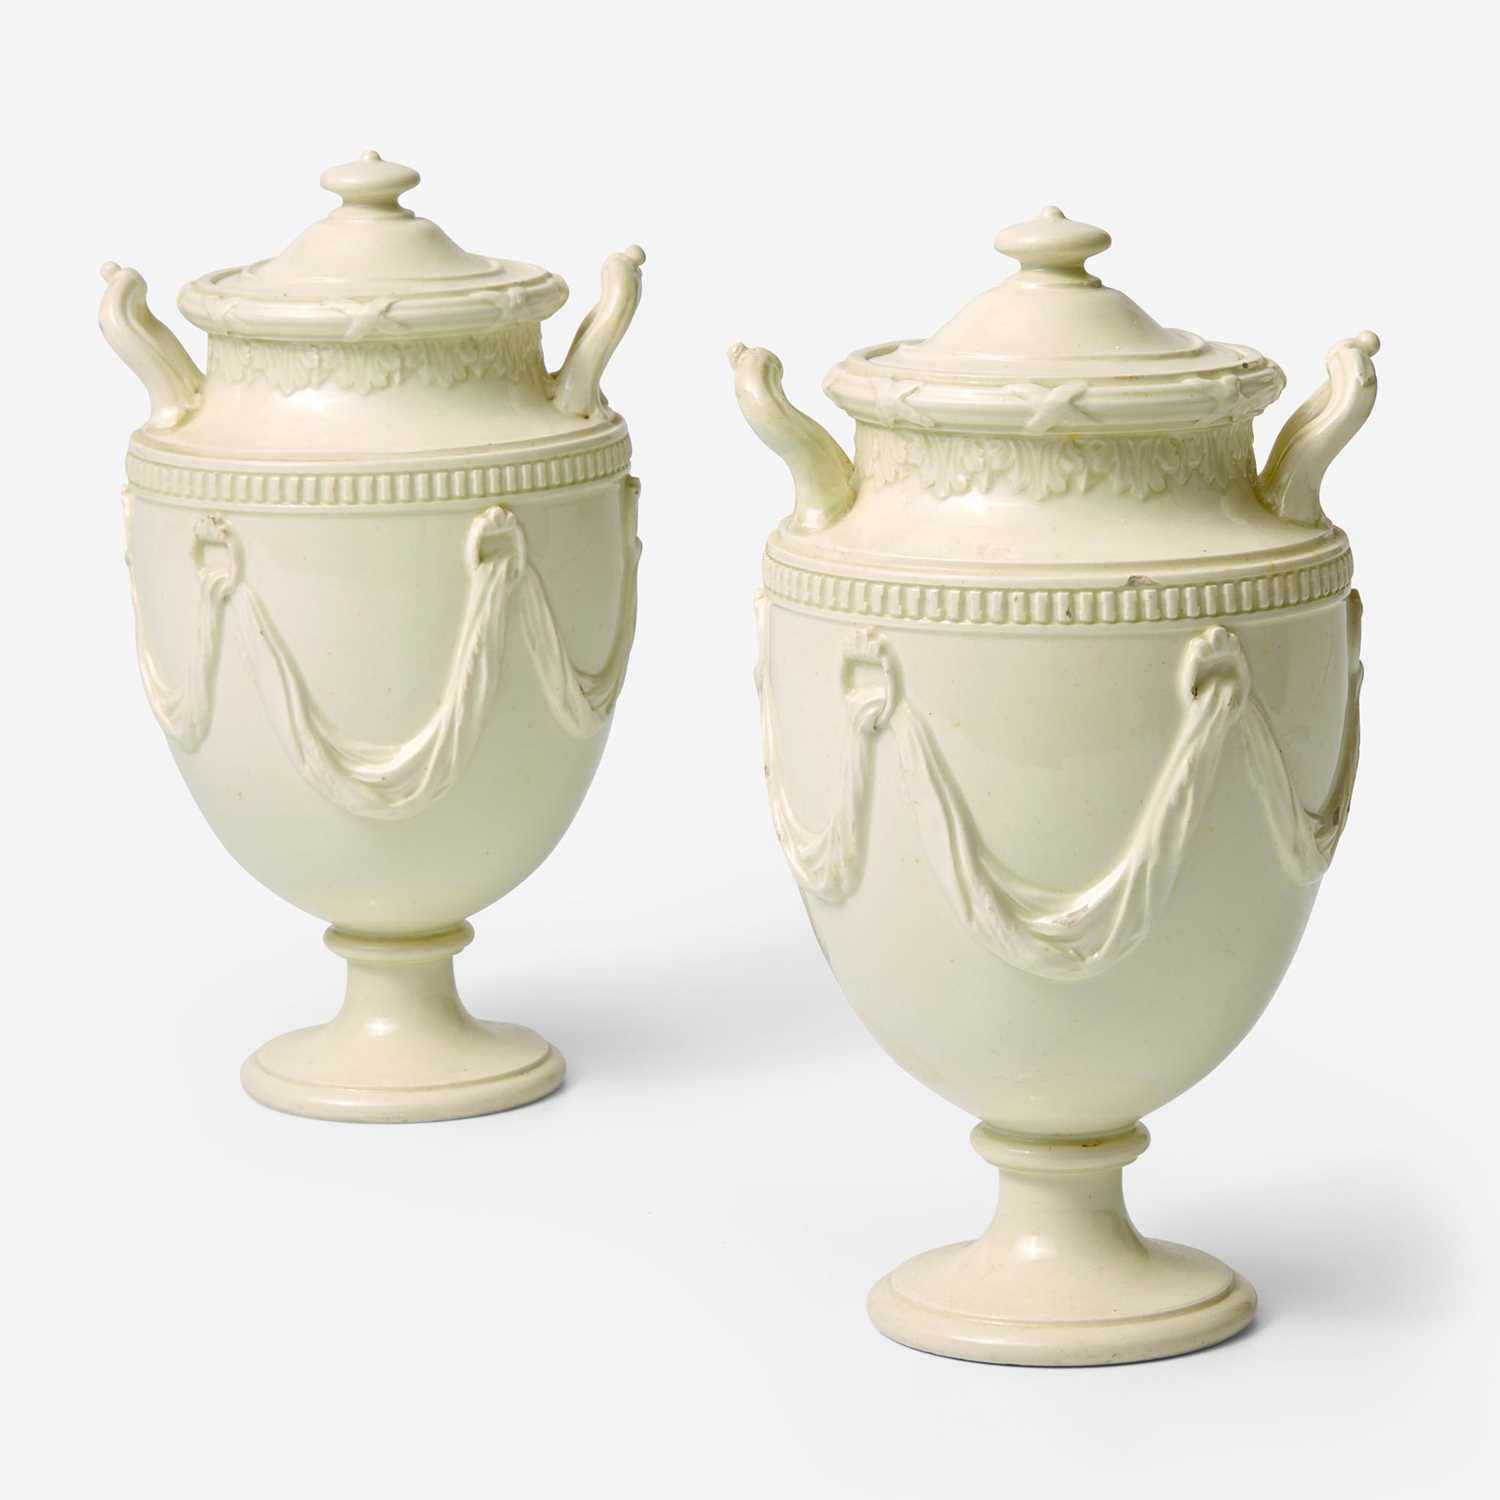 Lot 12 - A Pair of Wedgwood Queensware Vases and Covers